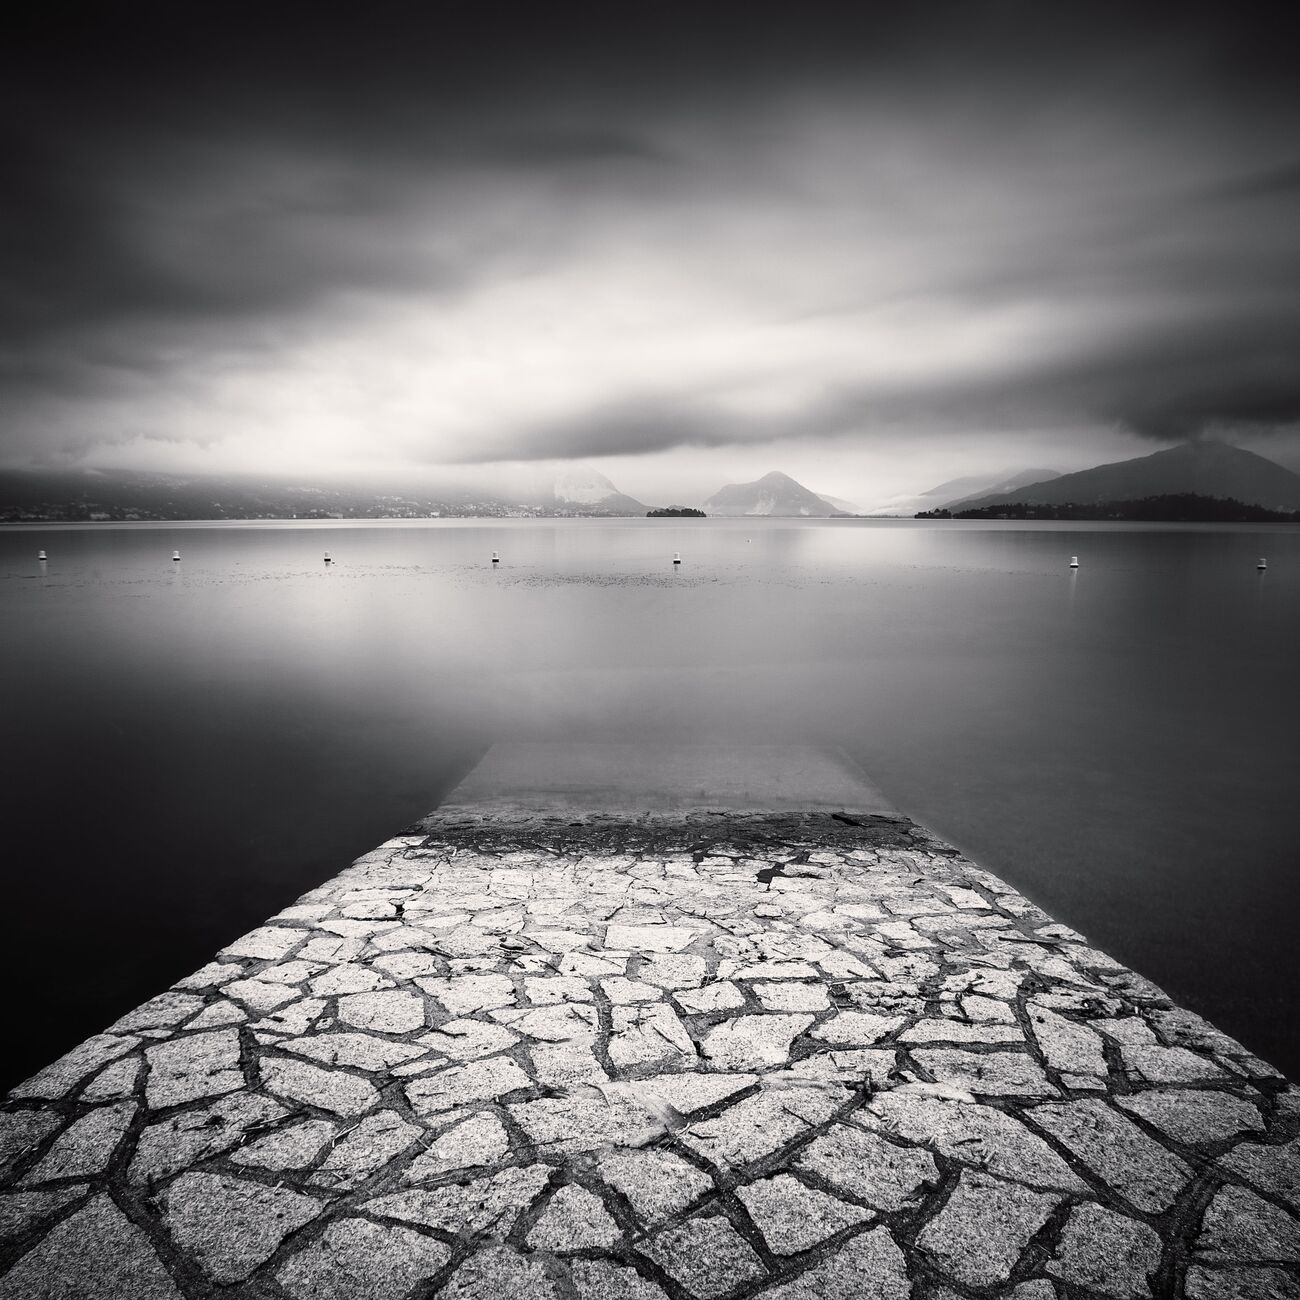 Paved Ramp, Study 2, Lake Maggiore, Italy. August 2014. Ref-11534 - Denis Olivier Photography